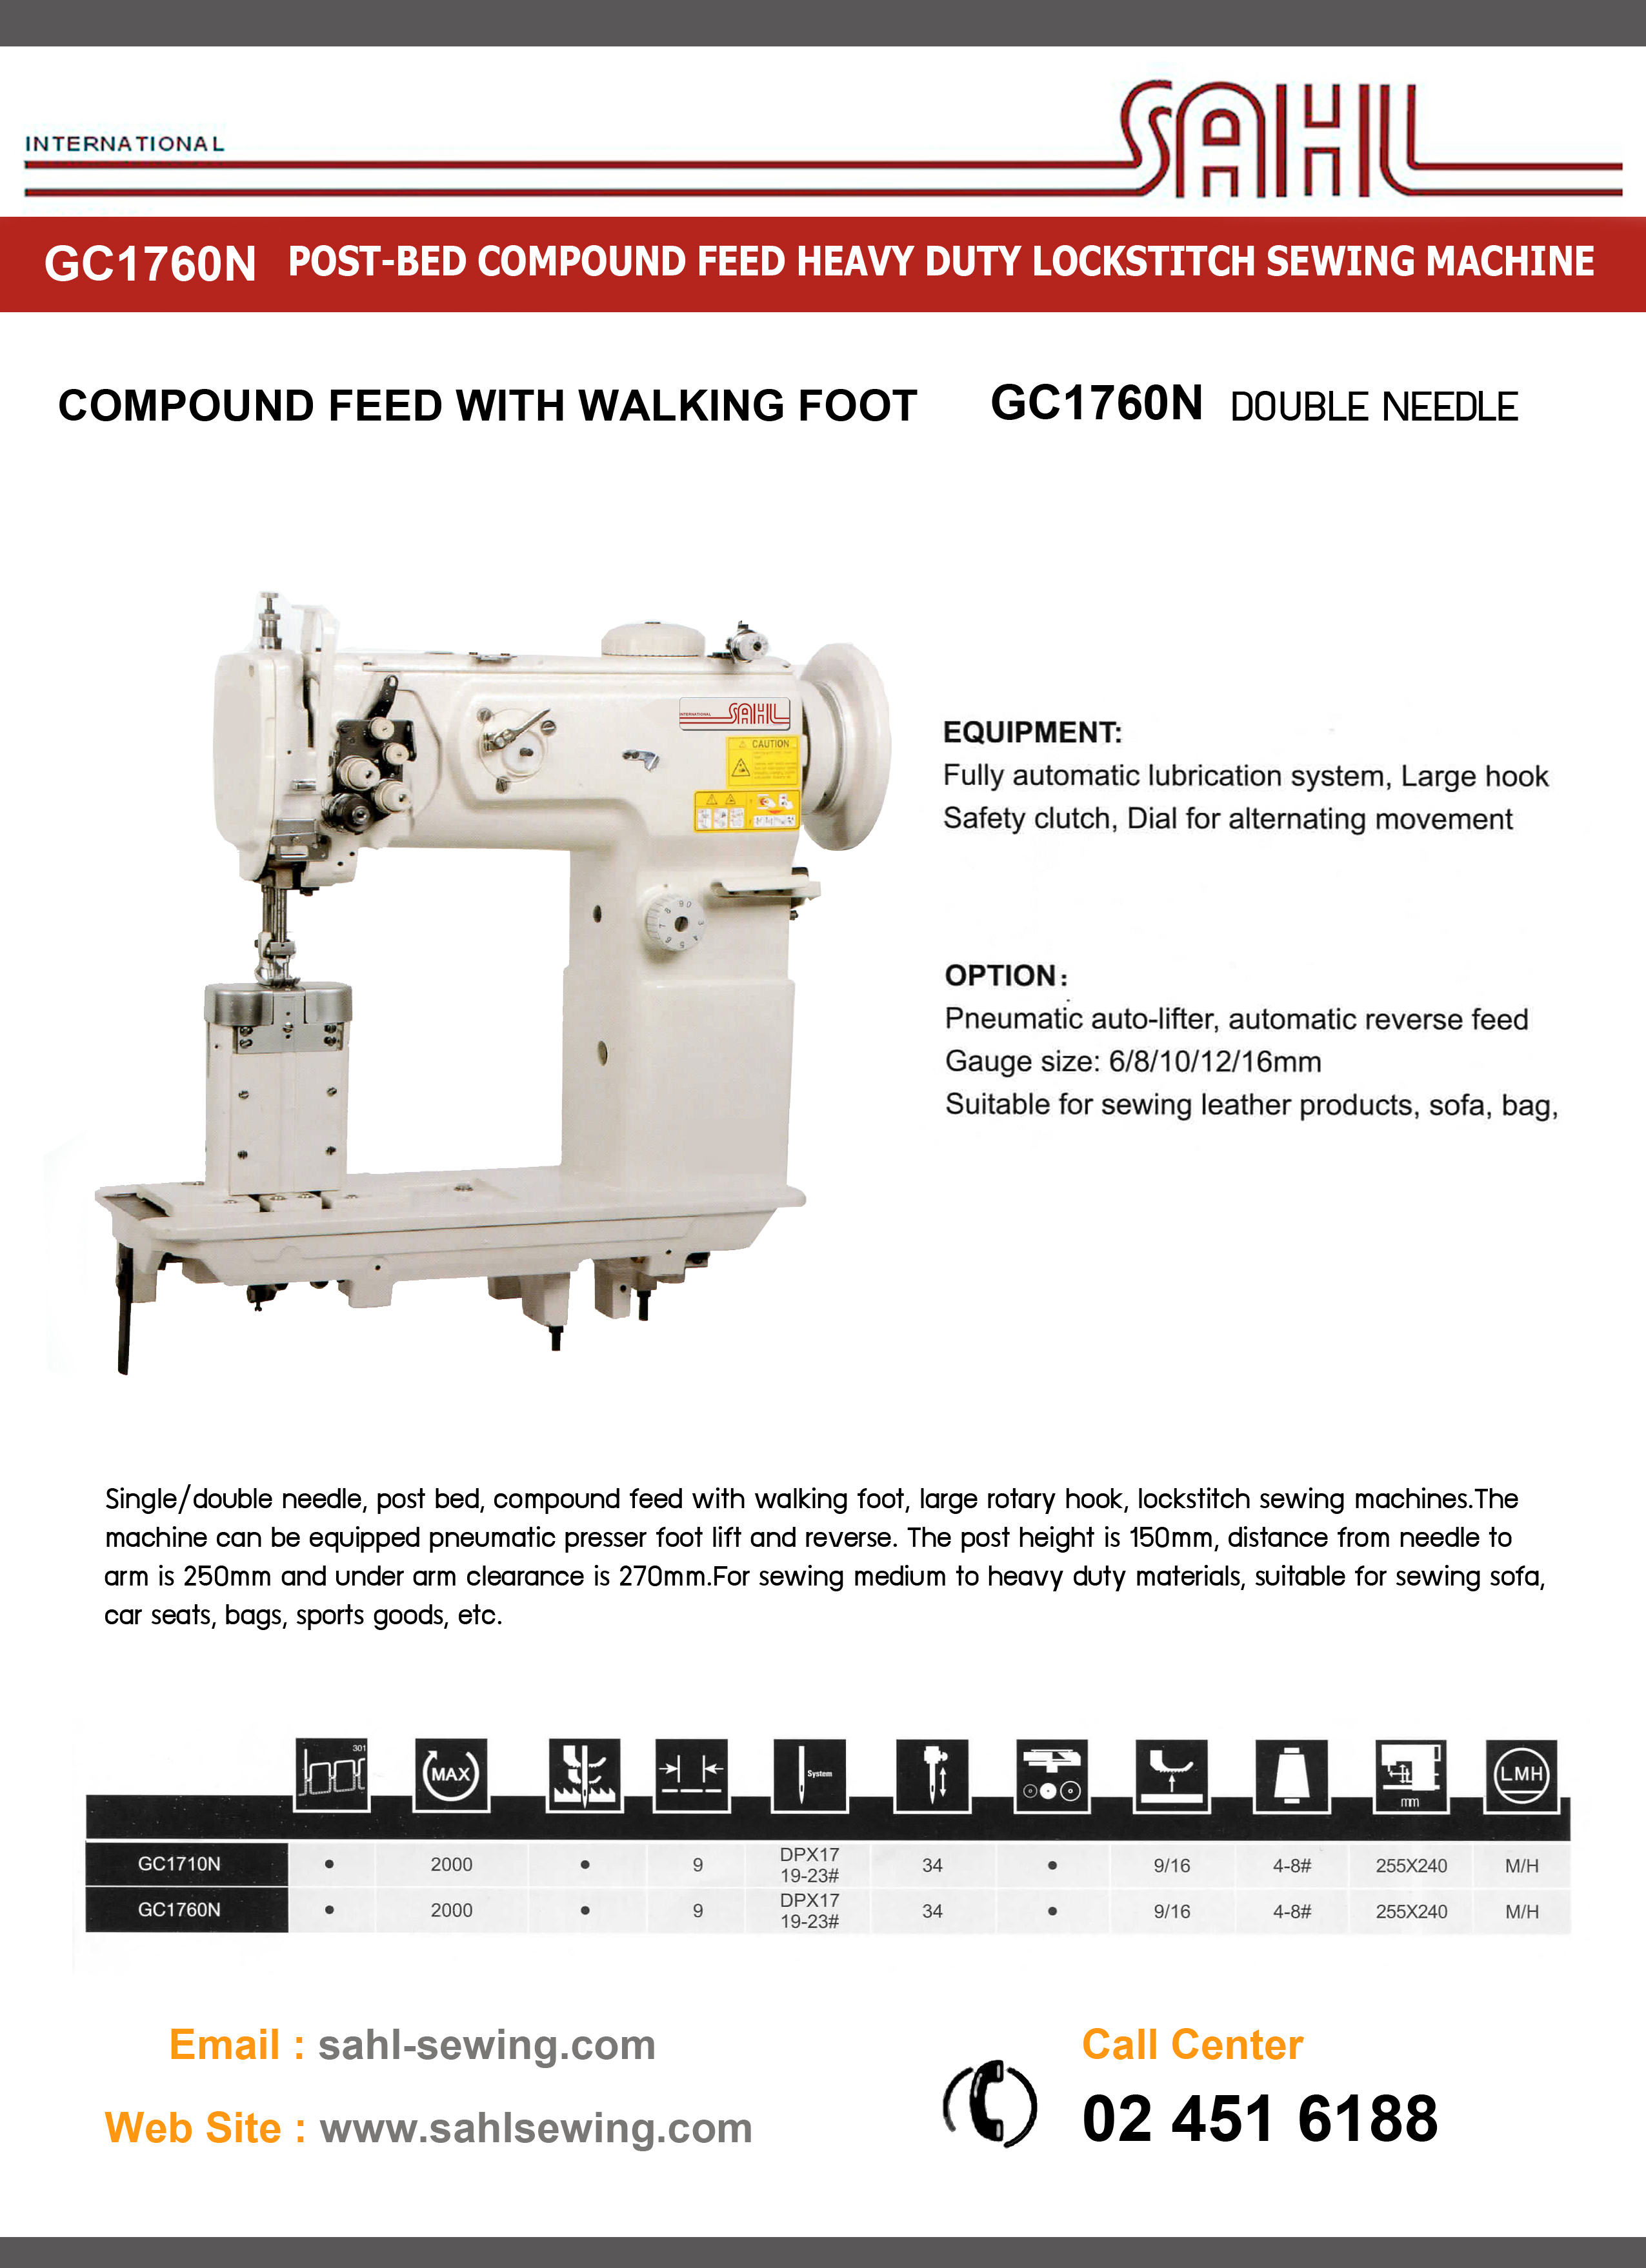 GC1760N >> POST-BED COMPOUND FEED HEAVY DUTY DOUBLE NEEDLE SEWING MACHINE >> ѡäҡк͡ 